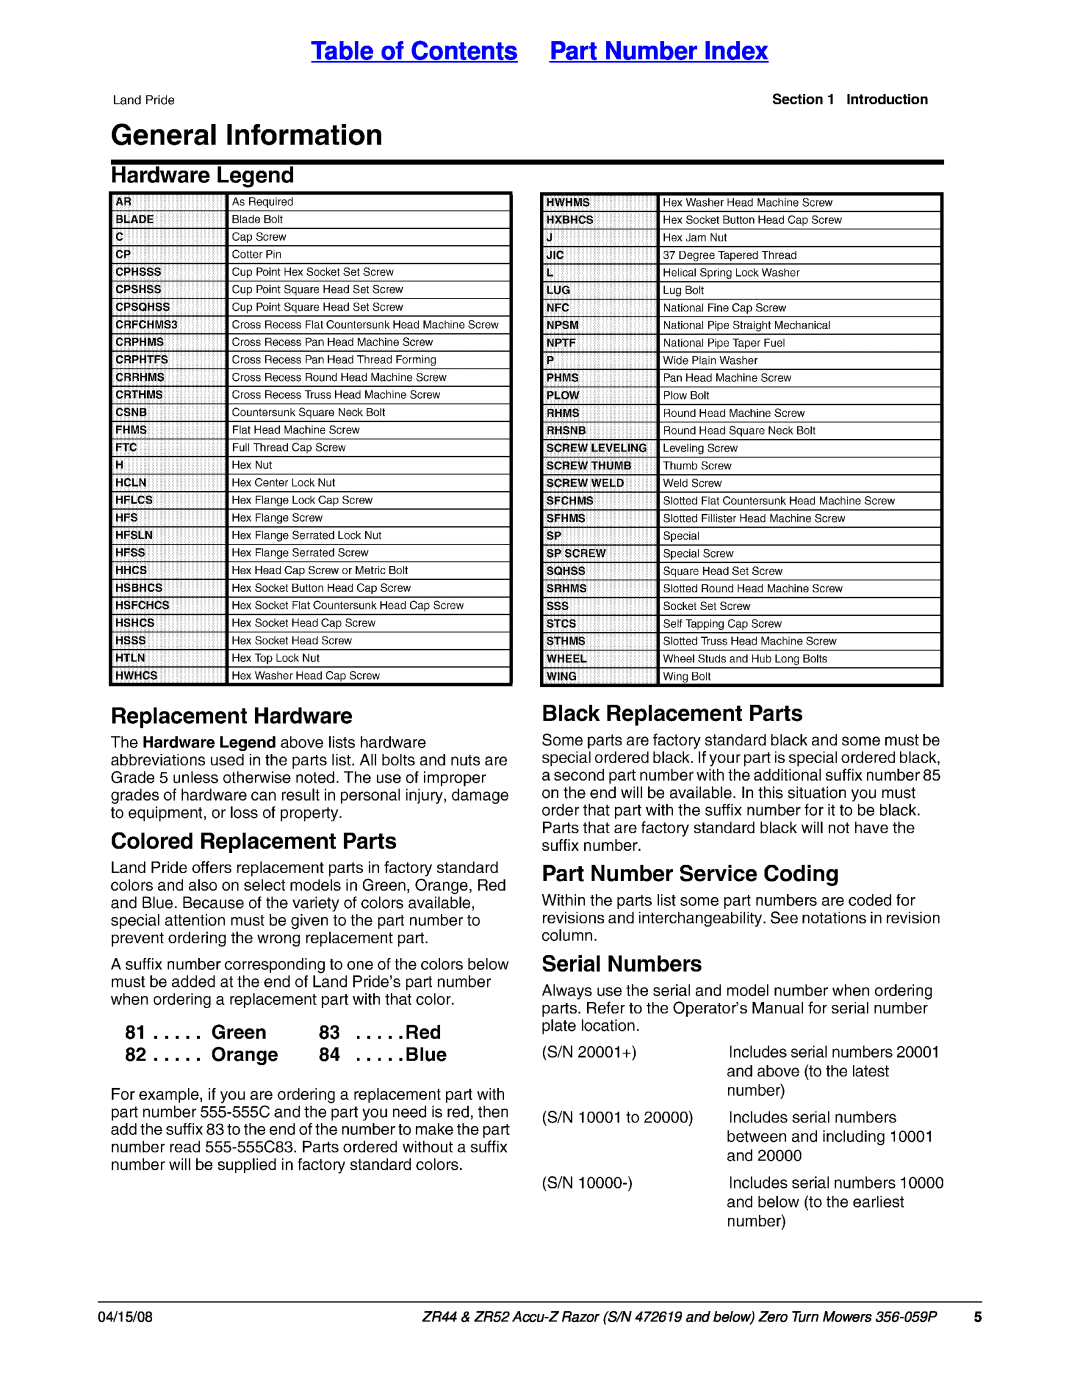 Land Pride ZR44, ZR52 manual Table of Contents Part Number Index, 04/15/08 